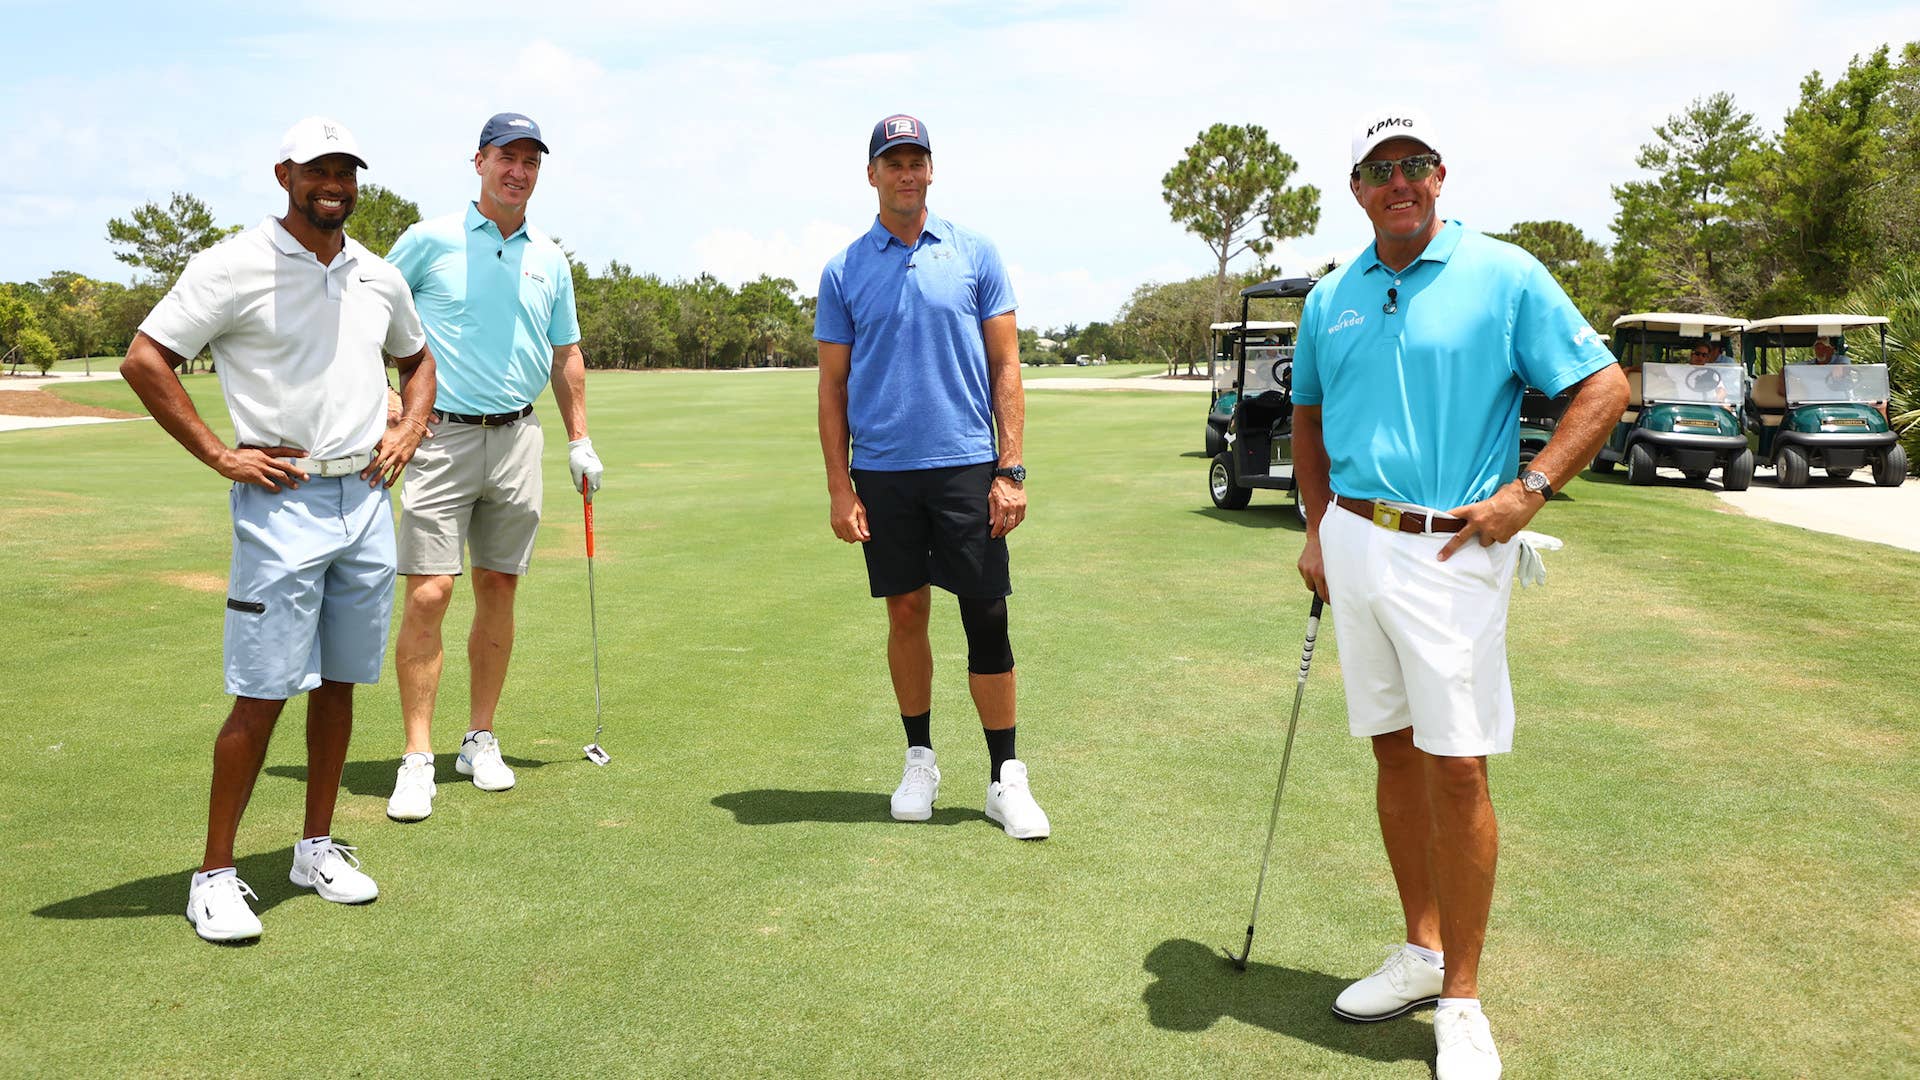 Tiger Woods, Peyton Manning, Tom Brady, and Phil Mickelson